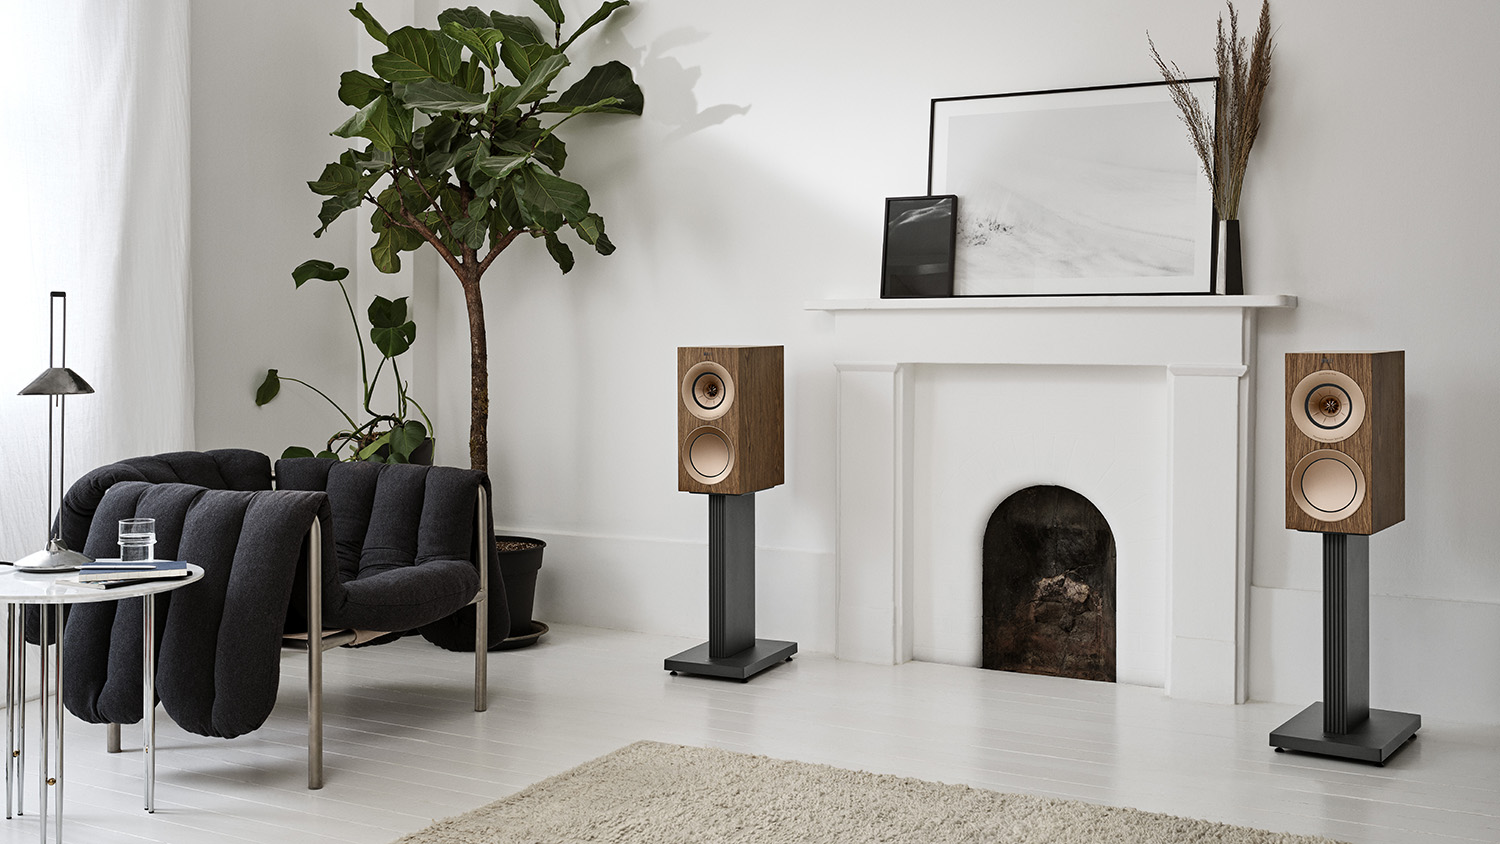 The KEF R3 Meta floor-standing speakers on either side of a fireplace in a light-colored living room